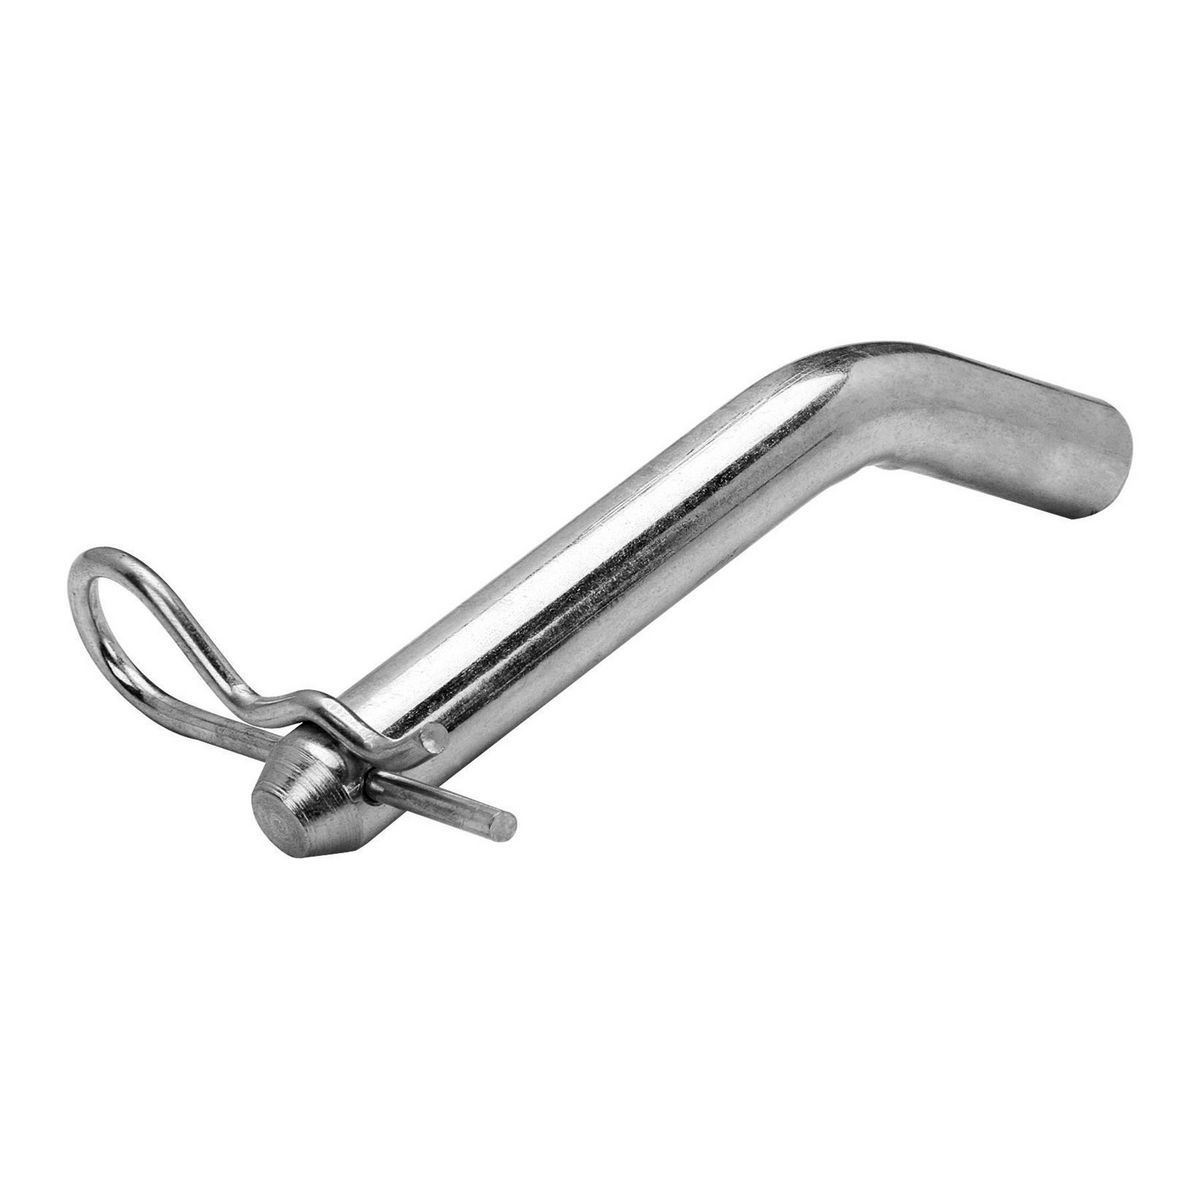 5/8" X 3" HITCH PIN WITH CLIP 65432